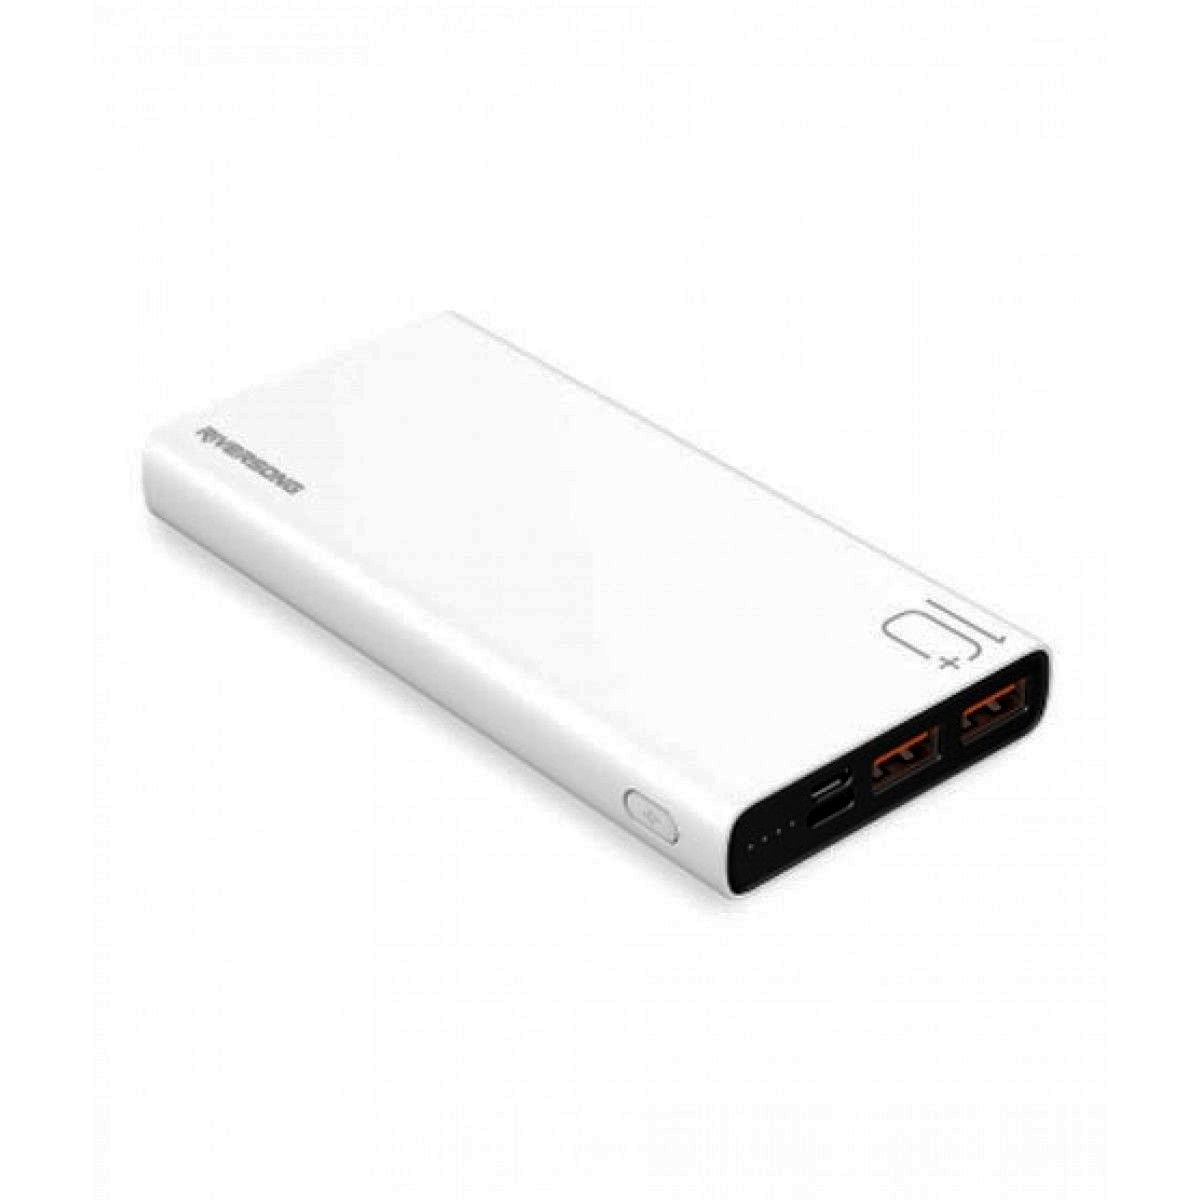 EXTERNAL BATTERY RIVERSONG 10000 MAH FOR SMART DEVICES  POWER BANK RISE 10 PB57 ,Smartphones & Tab Power Banks